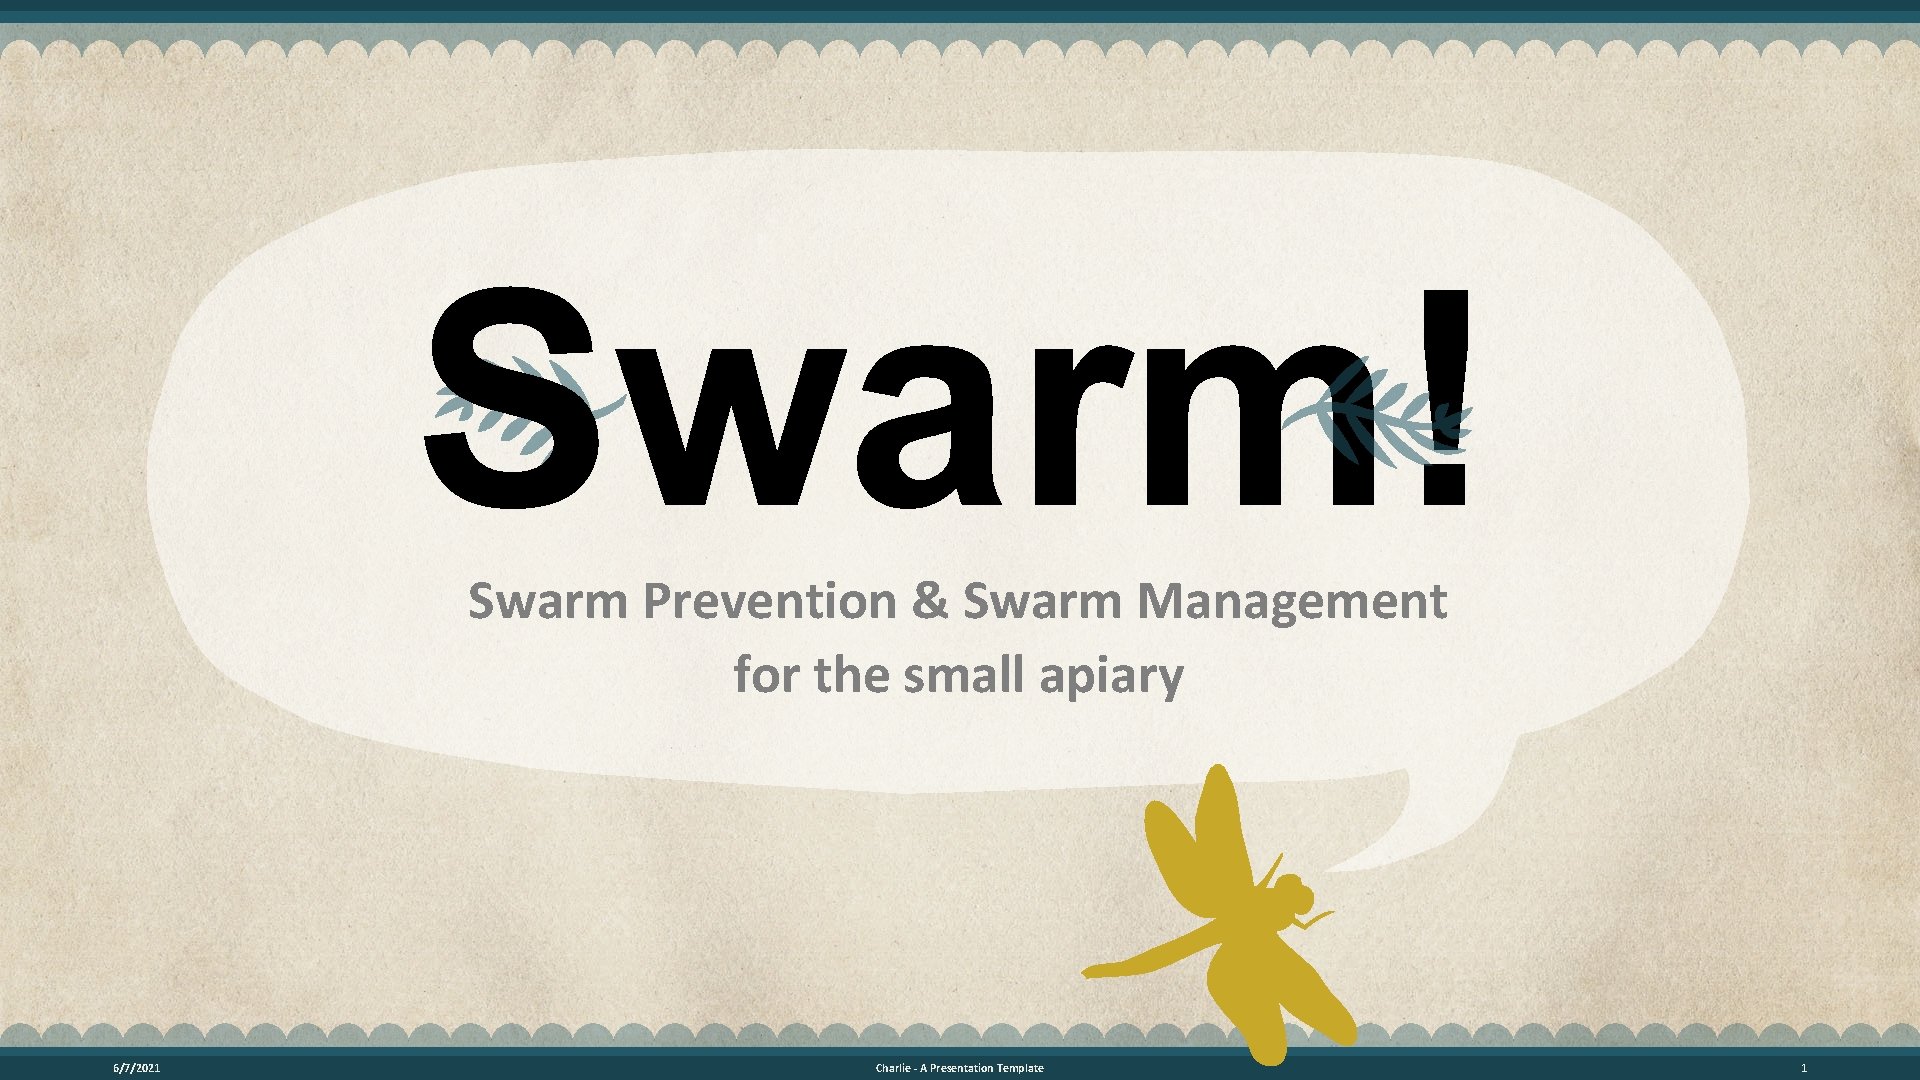 Swarm! Swarm Prevention & Swarm Management for the small apiary 6/7/2021 Charlie - A